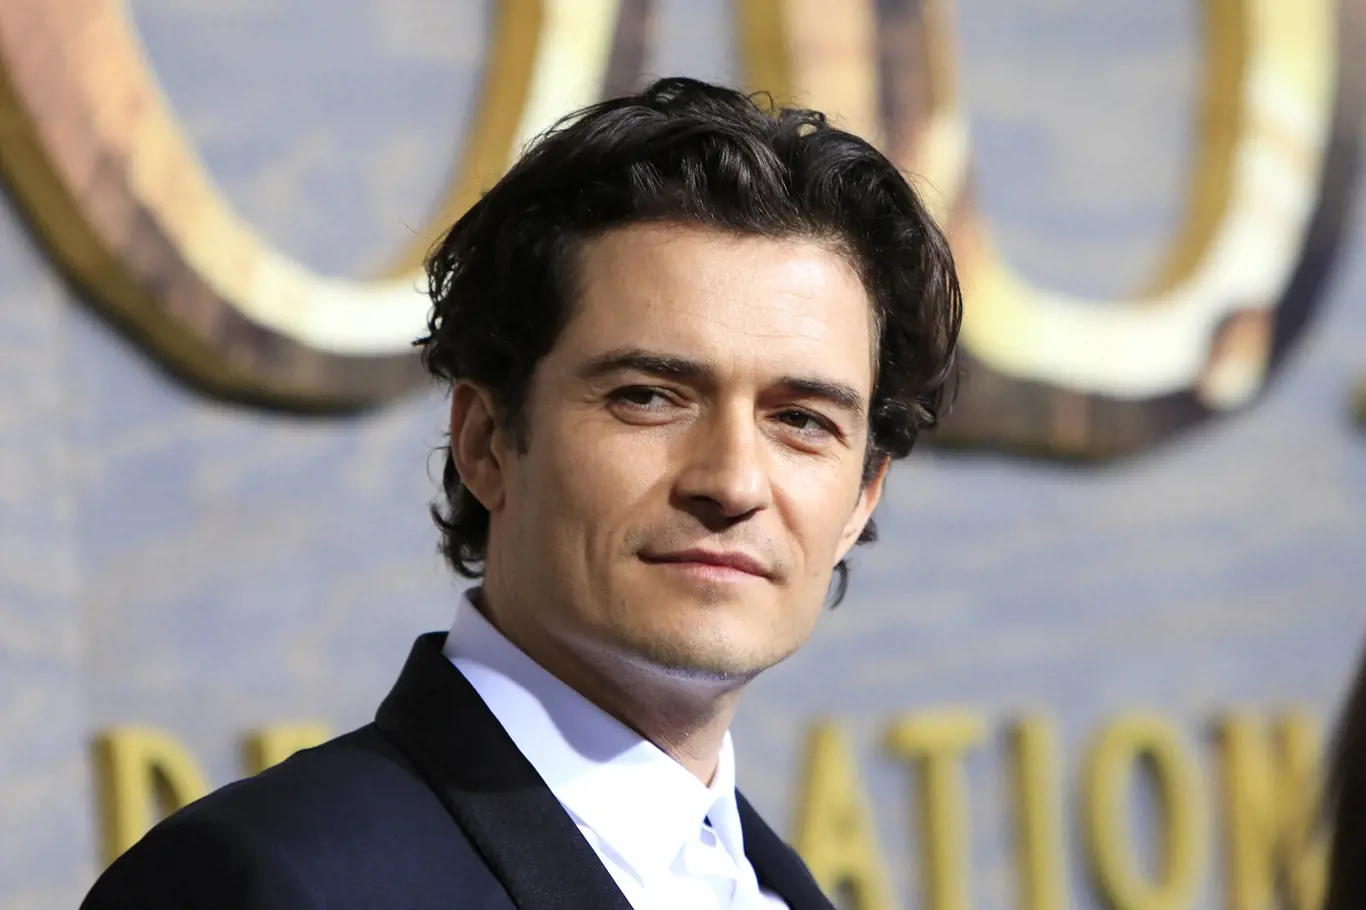 LOS ANGELES - DEC 2: Orlando Bloom at the premiere of Warner Bros' 'The Hobbit: The Desolation of Smaug' at the Dolby Theater on December 2, 2013 in Los Angeles, CA